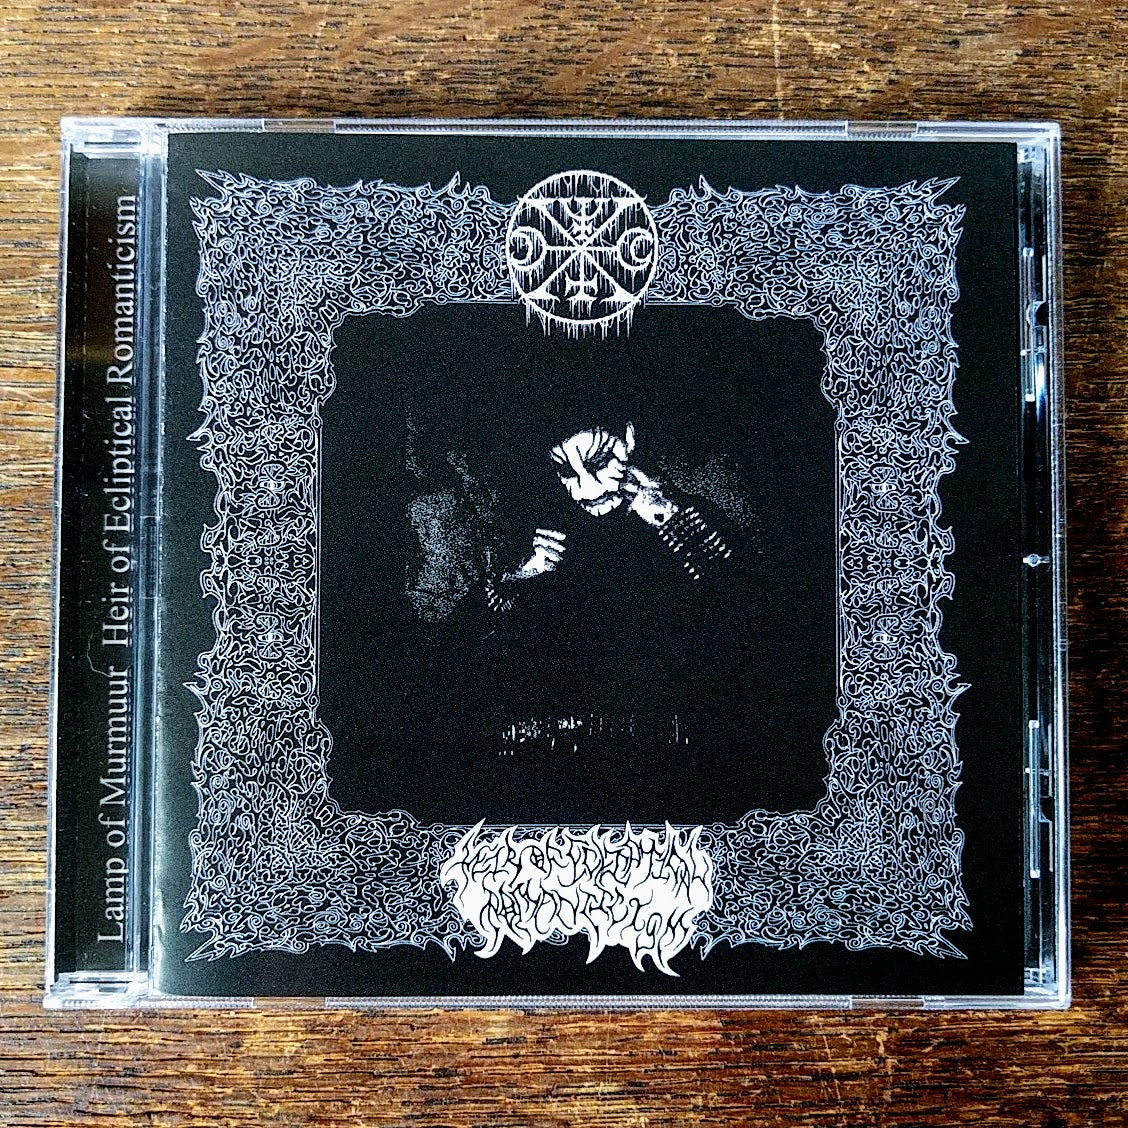 [SOLD OUT] LAMP OF MURMUUR "Heir Of Ecliptical Romanticism" CD